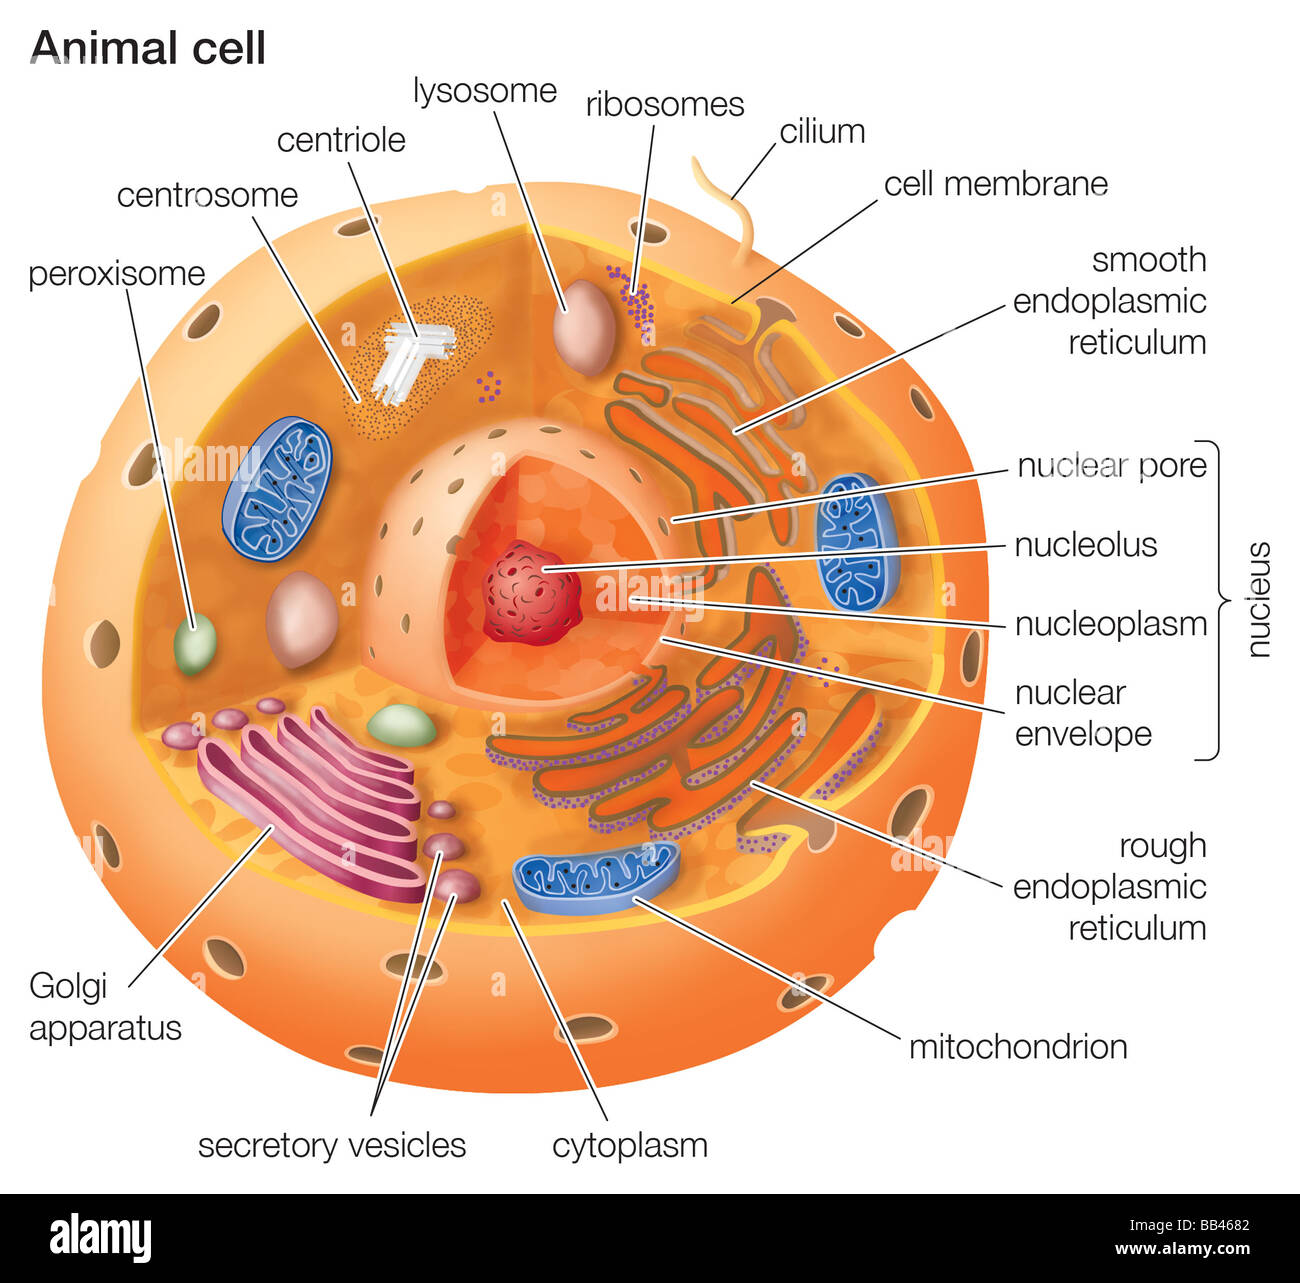 Make sketches of animal and plant cells which you observe under microscope